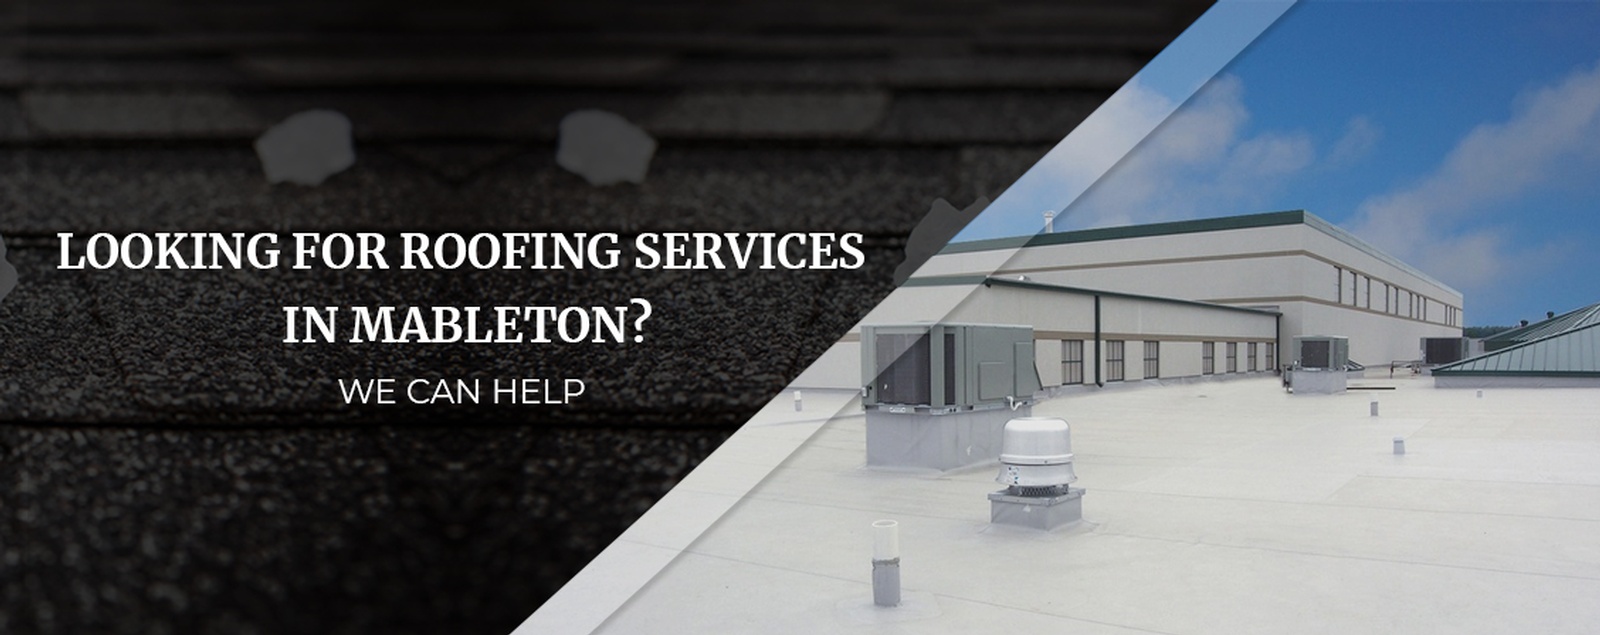 Looking For Roofing Services In Mableton We Can Help